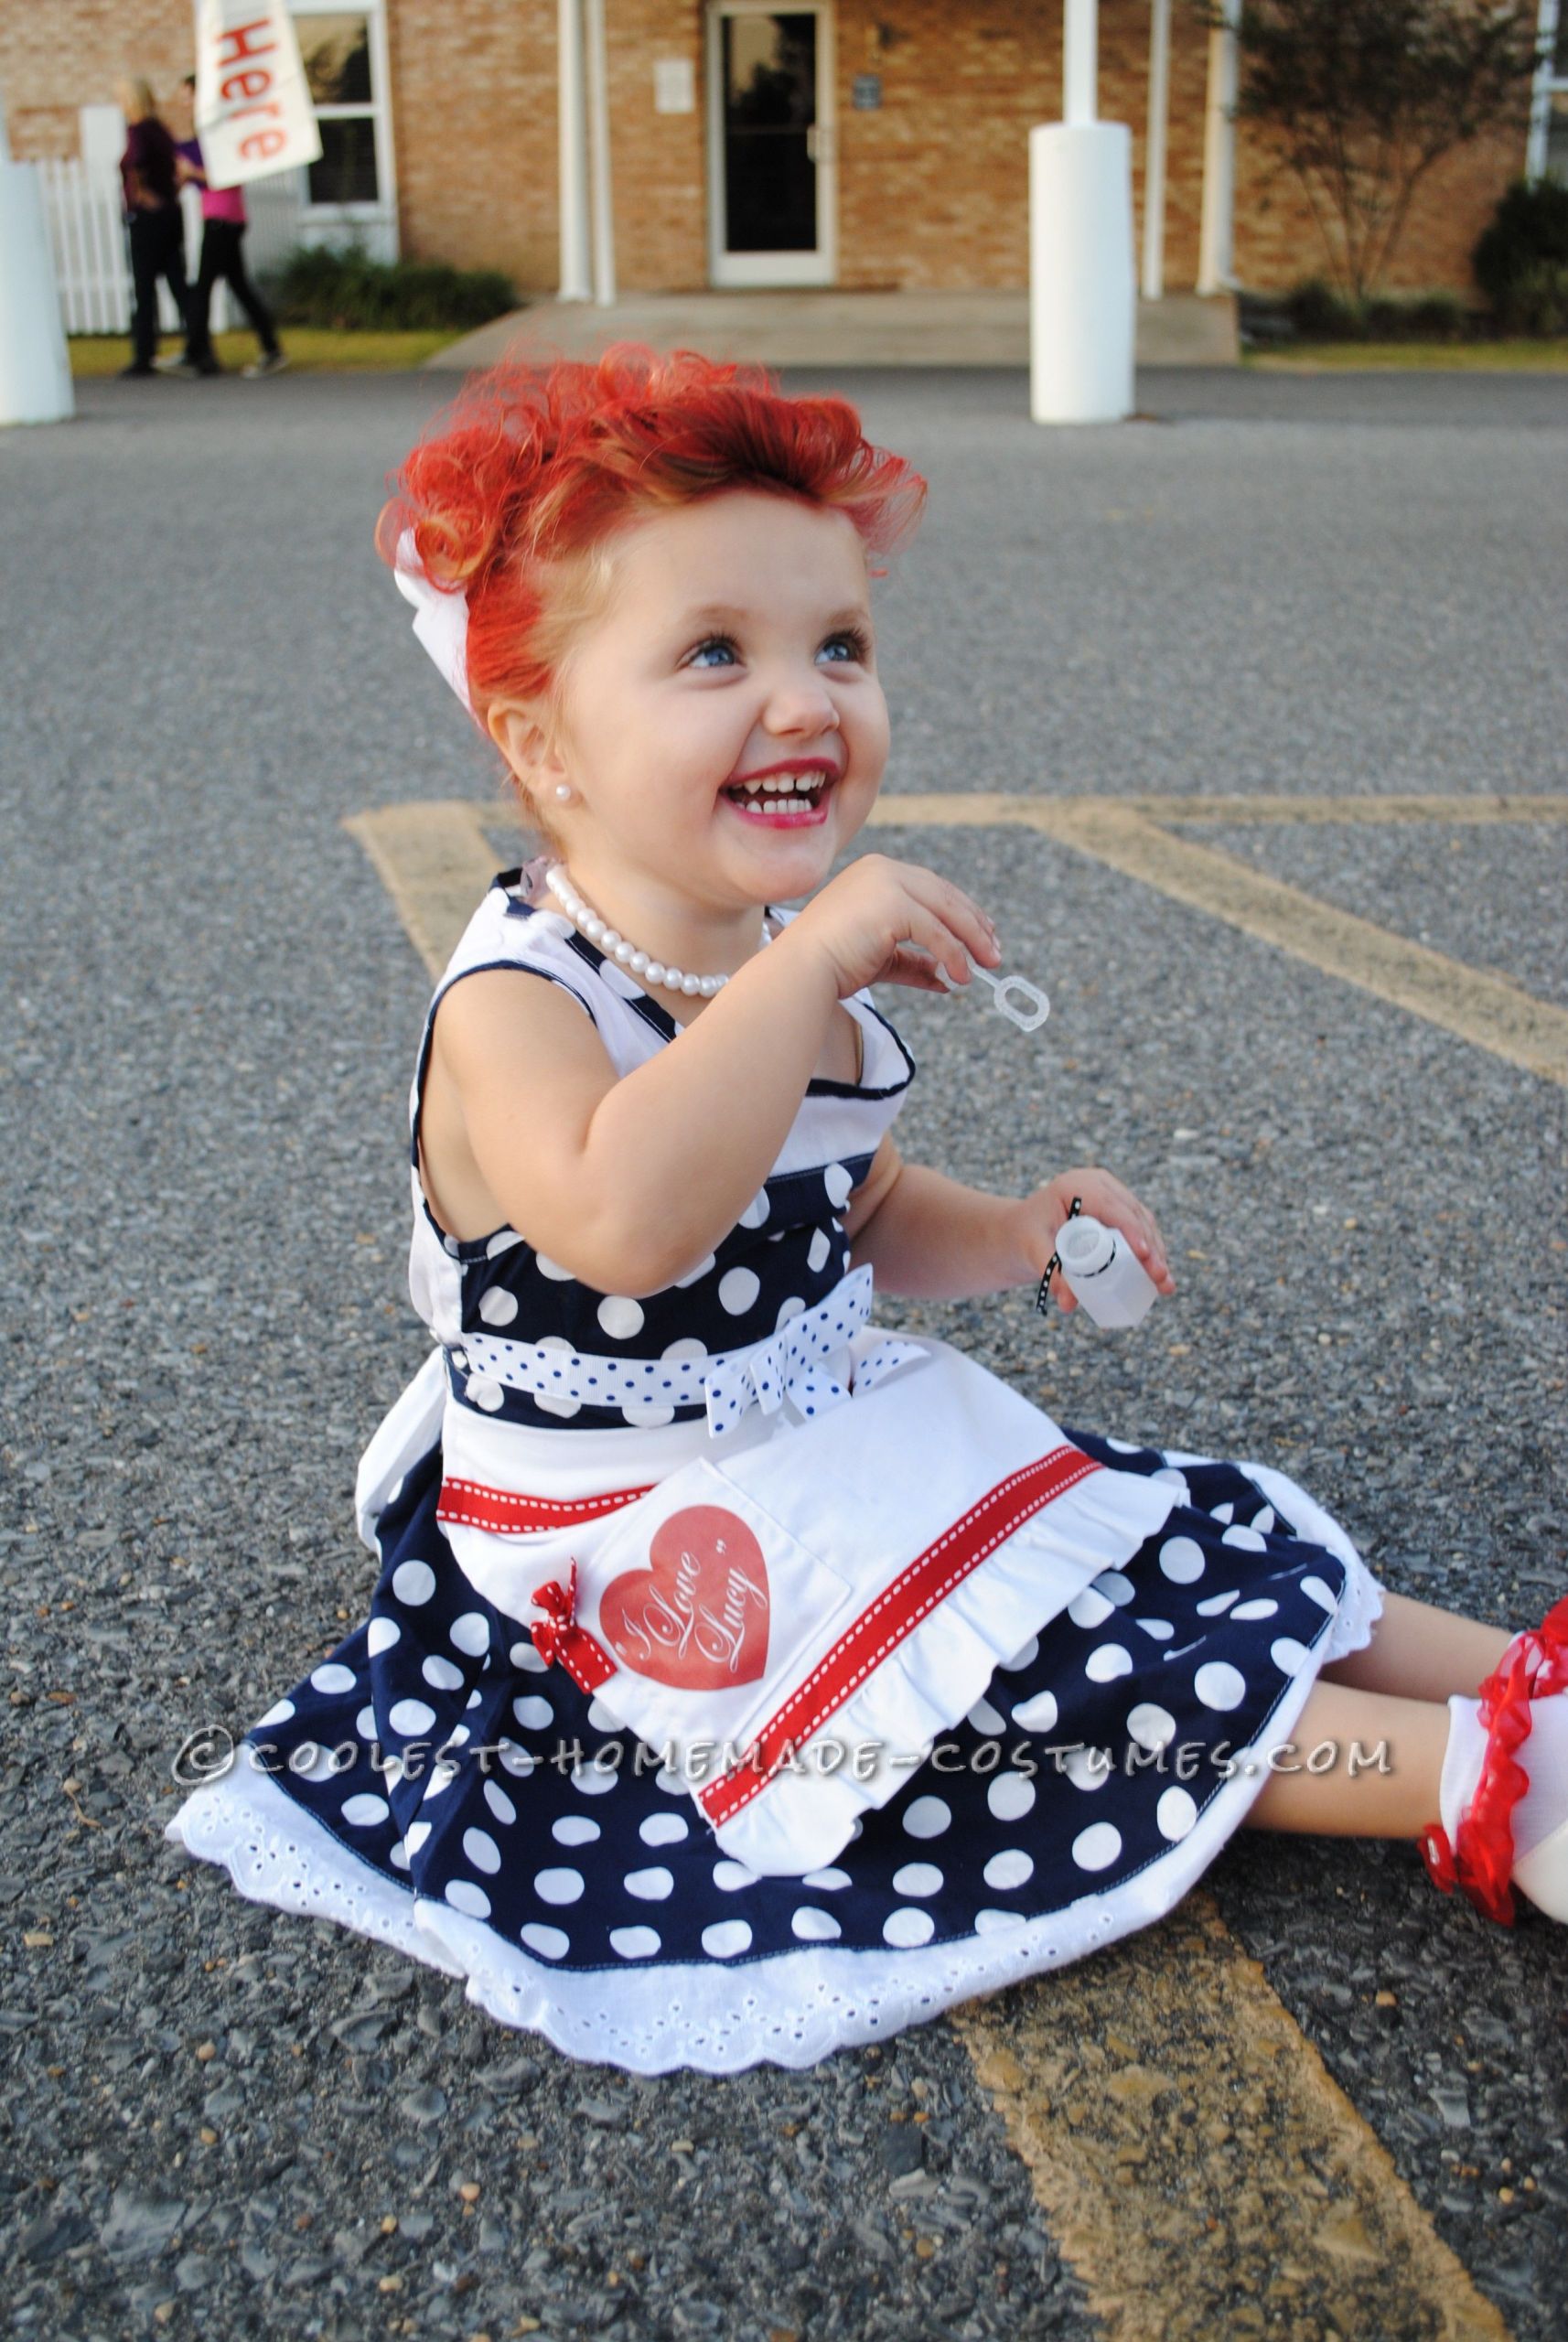 Toddler Costume DIY
 Adorable “I Love Lucy” Homemade Costume for a Toddler